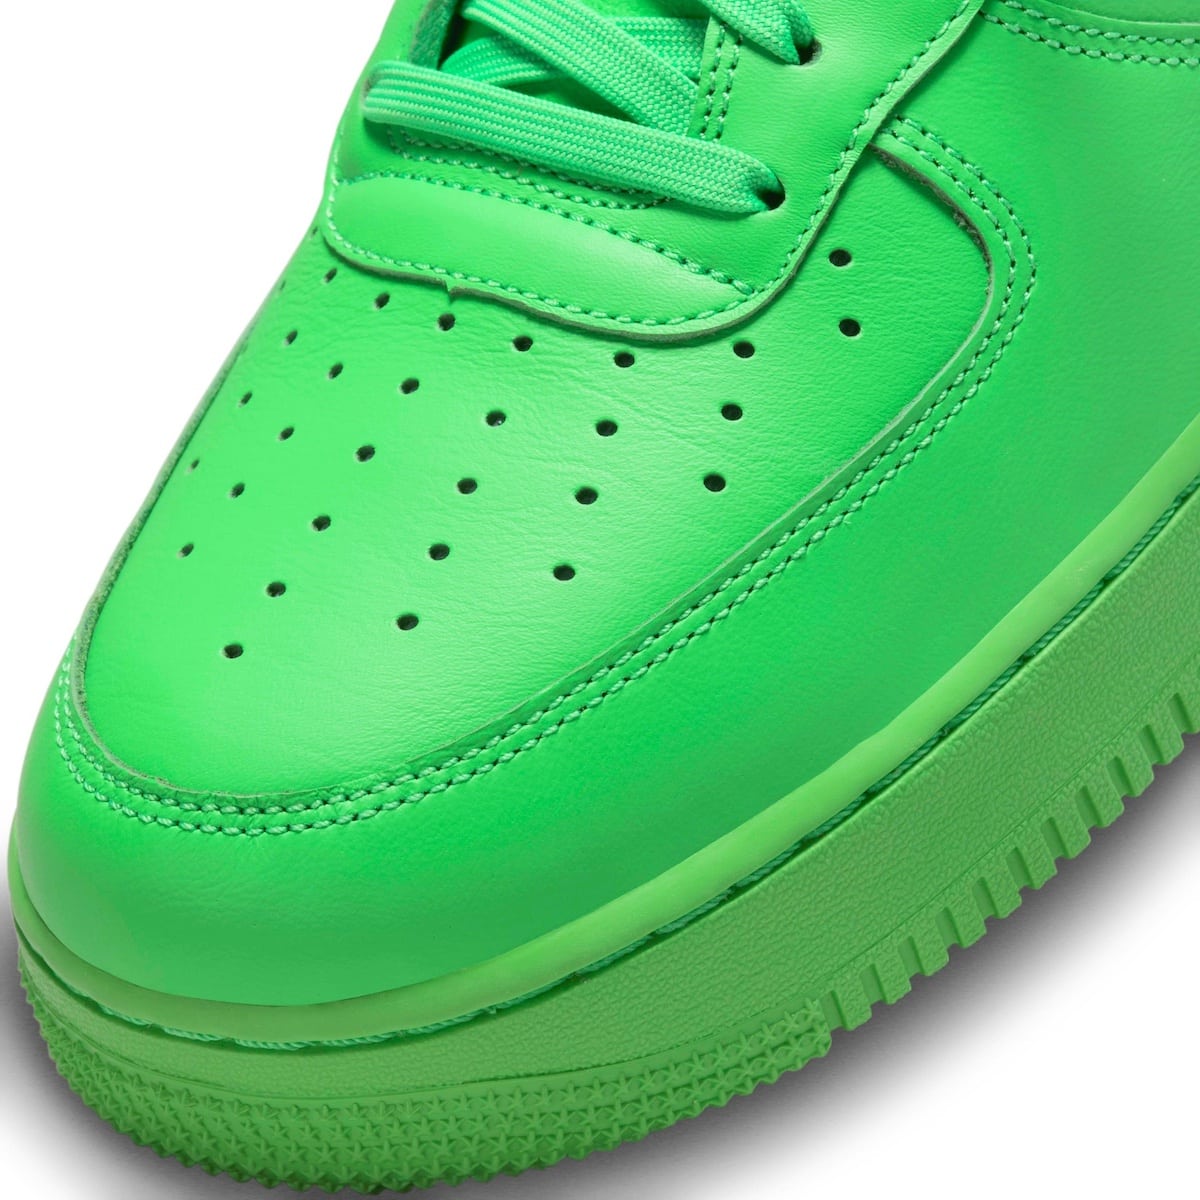 The Off-White x Nike Air Force 1 Green Has Been Unveiled